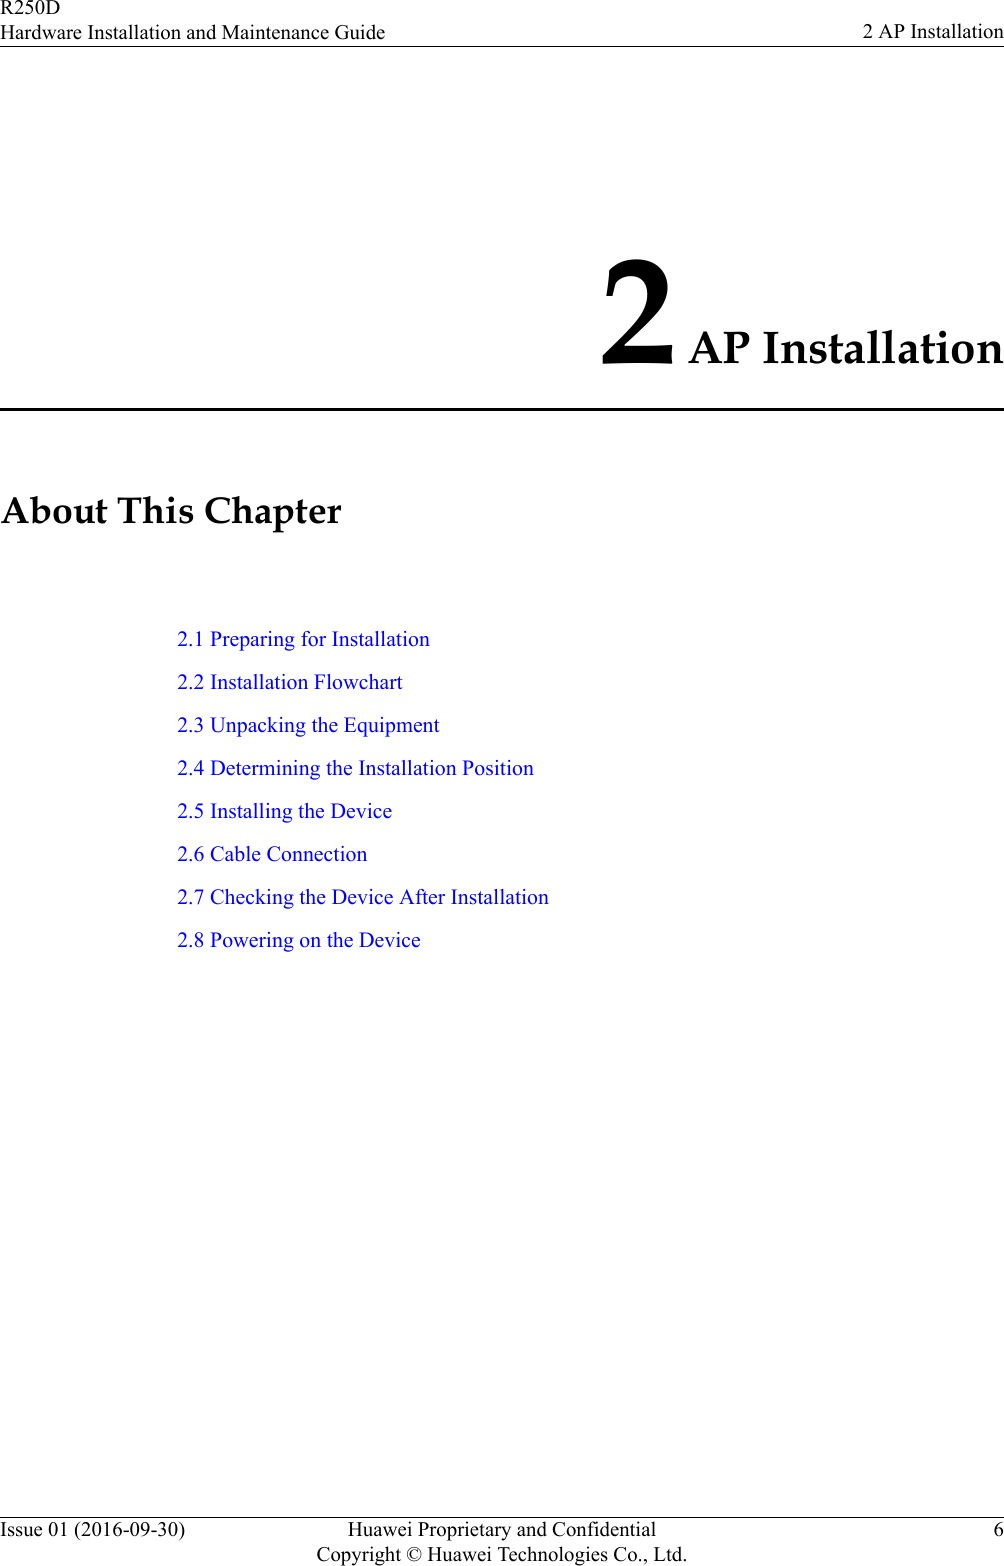 2 AP InstallationAbout This Chapter2.1 Preparing for Installation2.2 Installation Flowchart2.3 Unpacking the Equipment2.4 Determining the Installation Position2.5 Installing the Device2.6 Cable Connection2.7 Checking the Device After Installation2.8 Powering on the DeviceR250DHardware Installation and Maintenance Guide 2 AP InstallationIssue 01 (2016-09-30) Huawei Proprietary and ConfidentialCopyright © Huawei Technologies Co., Ltd.6